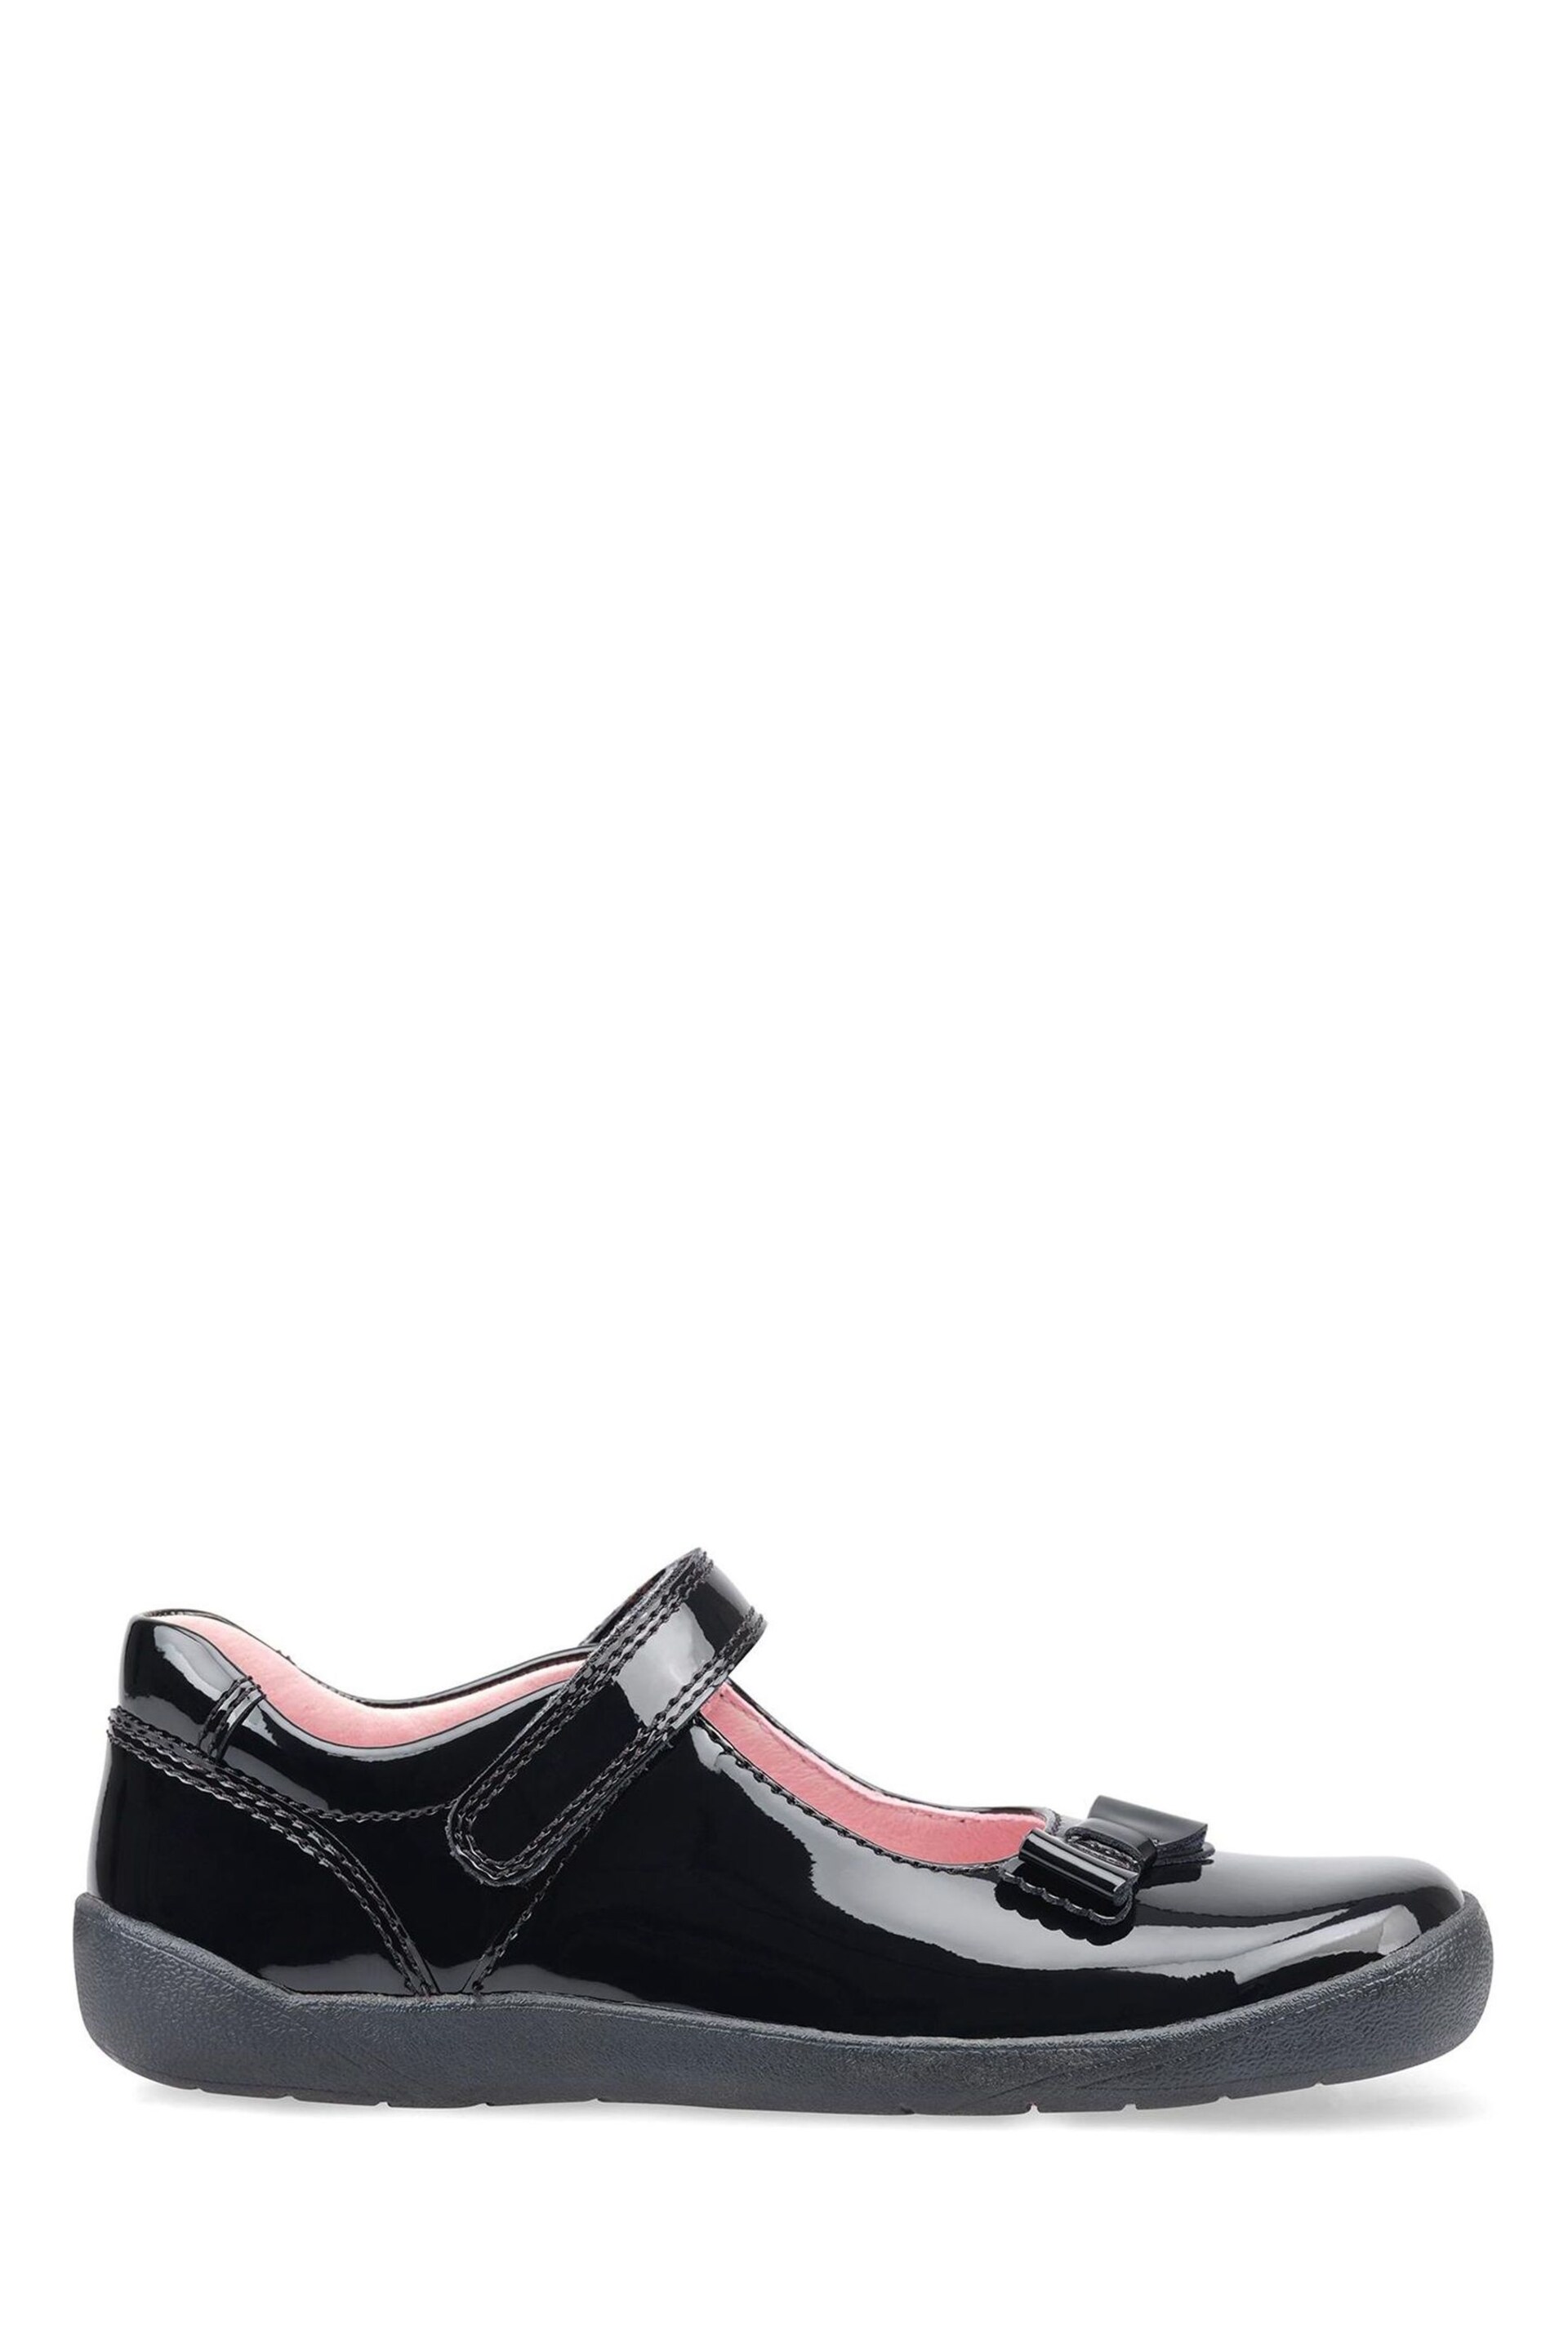 Start-Rite Giggle Riptape Black Leather School Shoes Wide Fit - Image 1 of 6